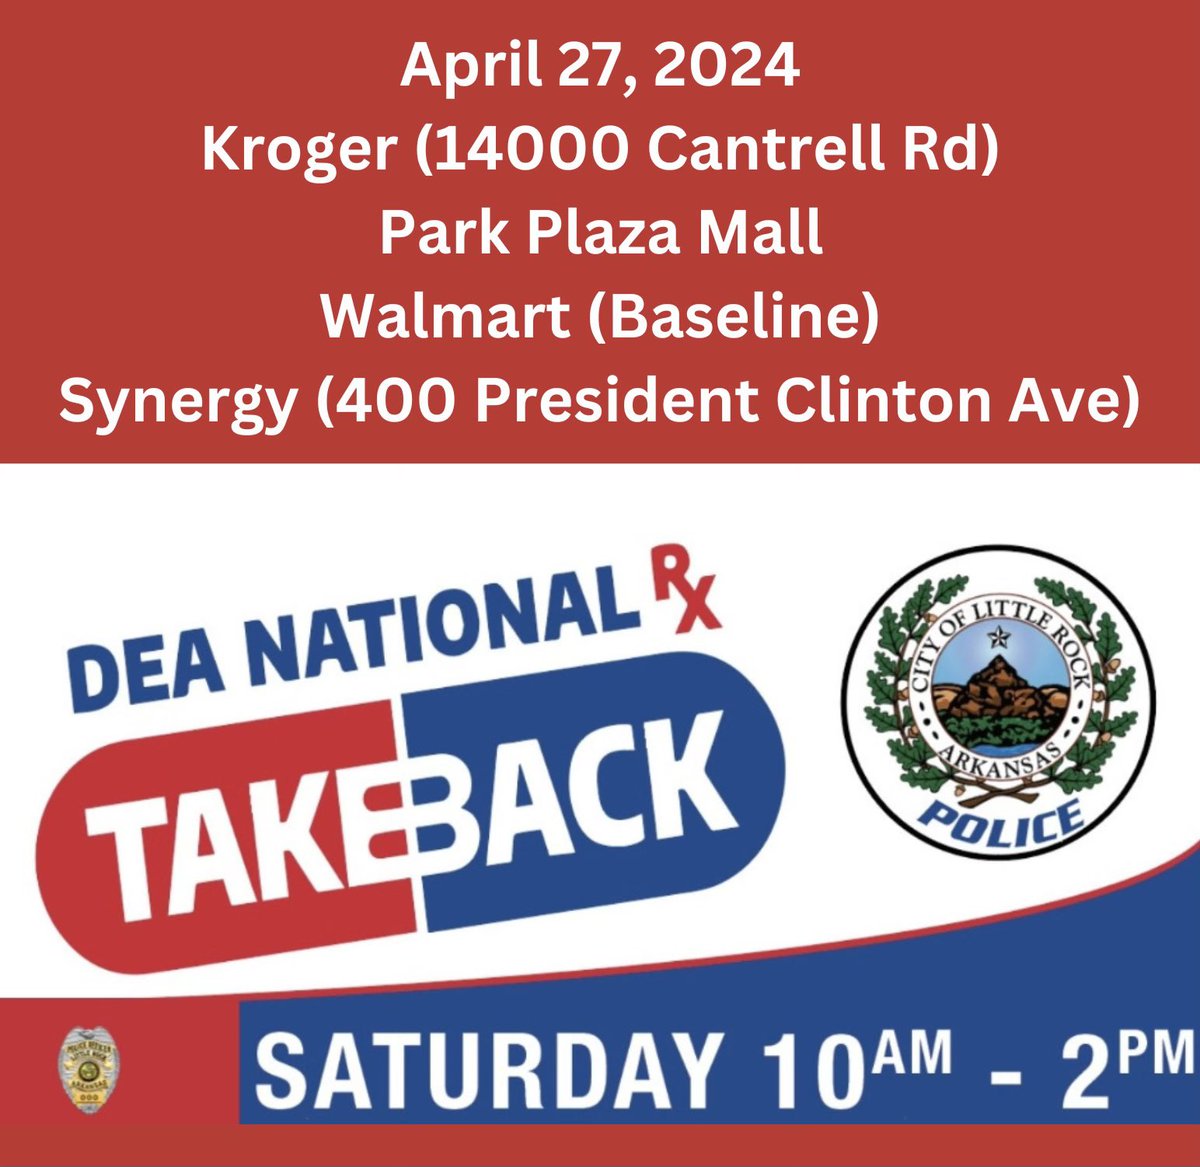 Stop by any of the referenced locations and discard your unused, expired, prescribed or over the counter medications.